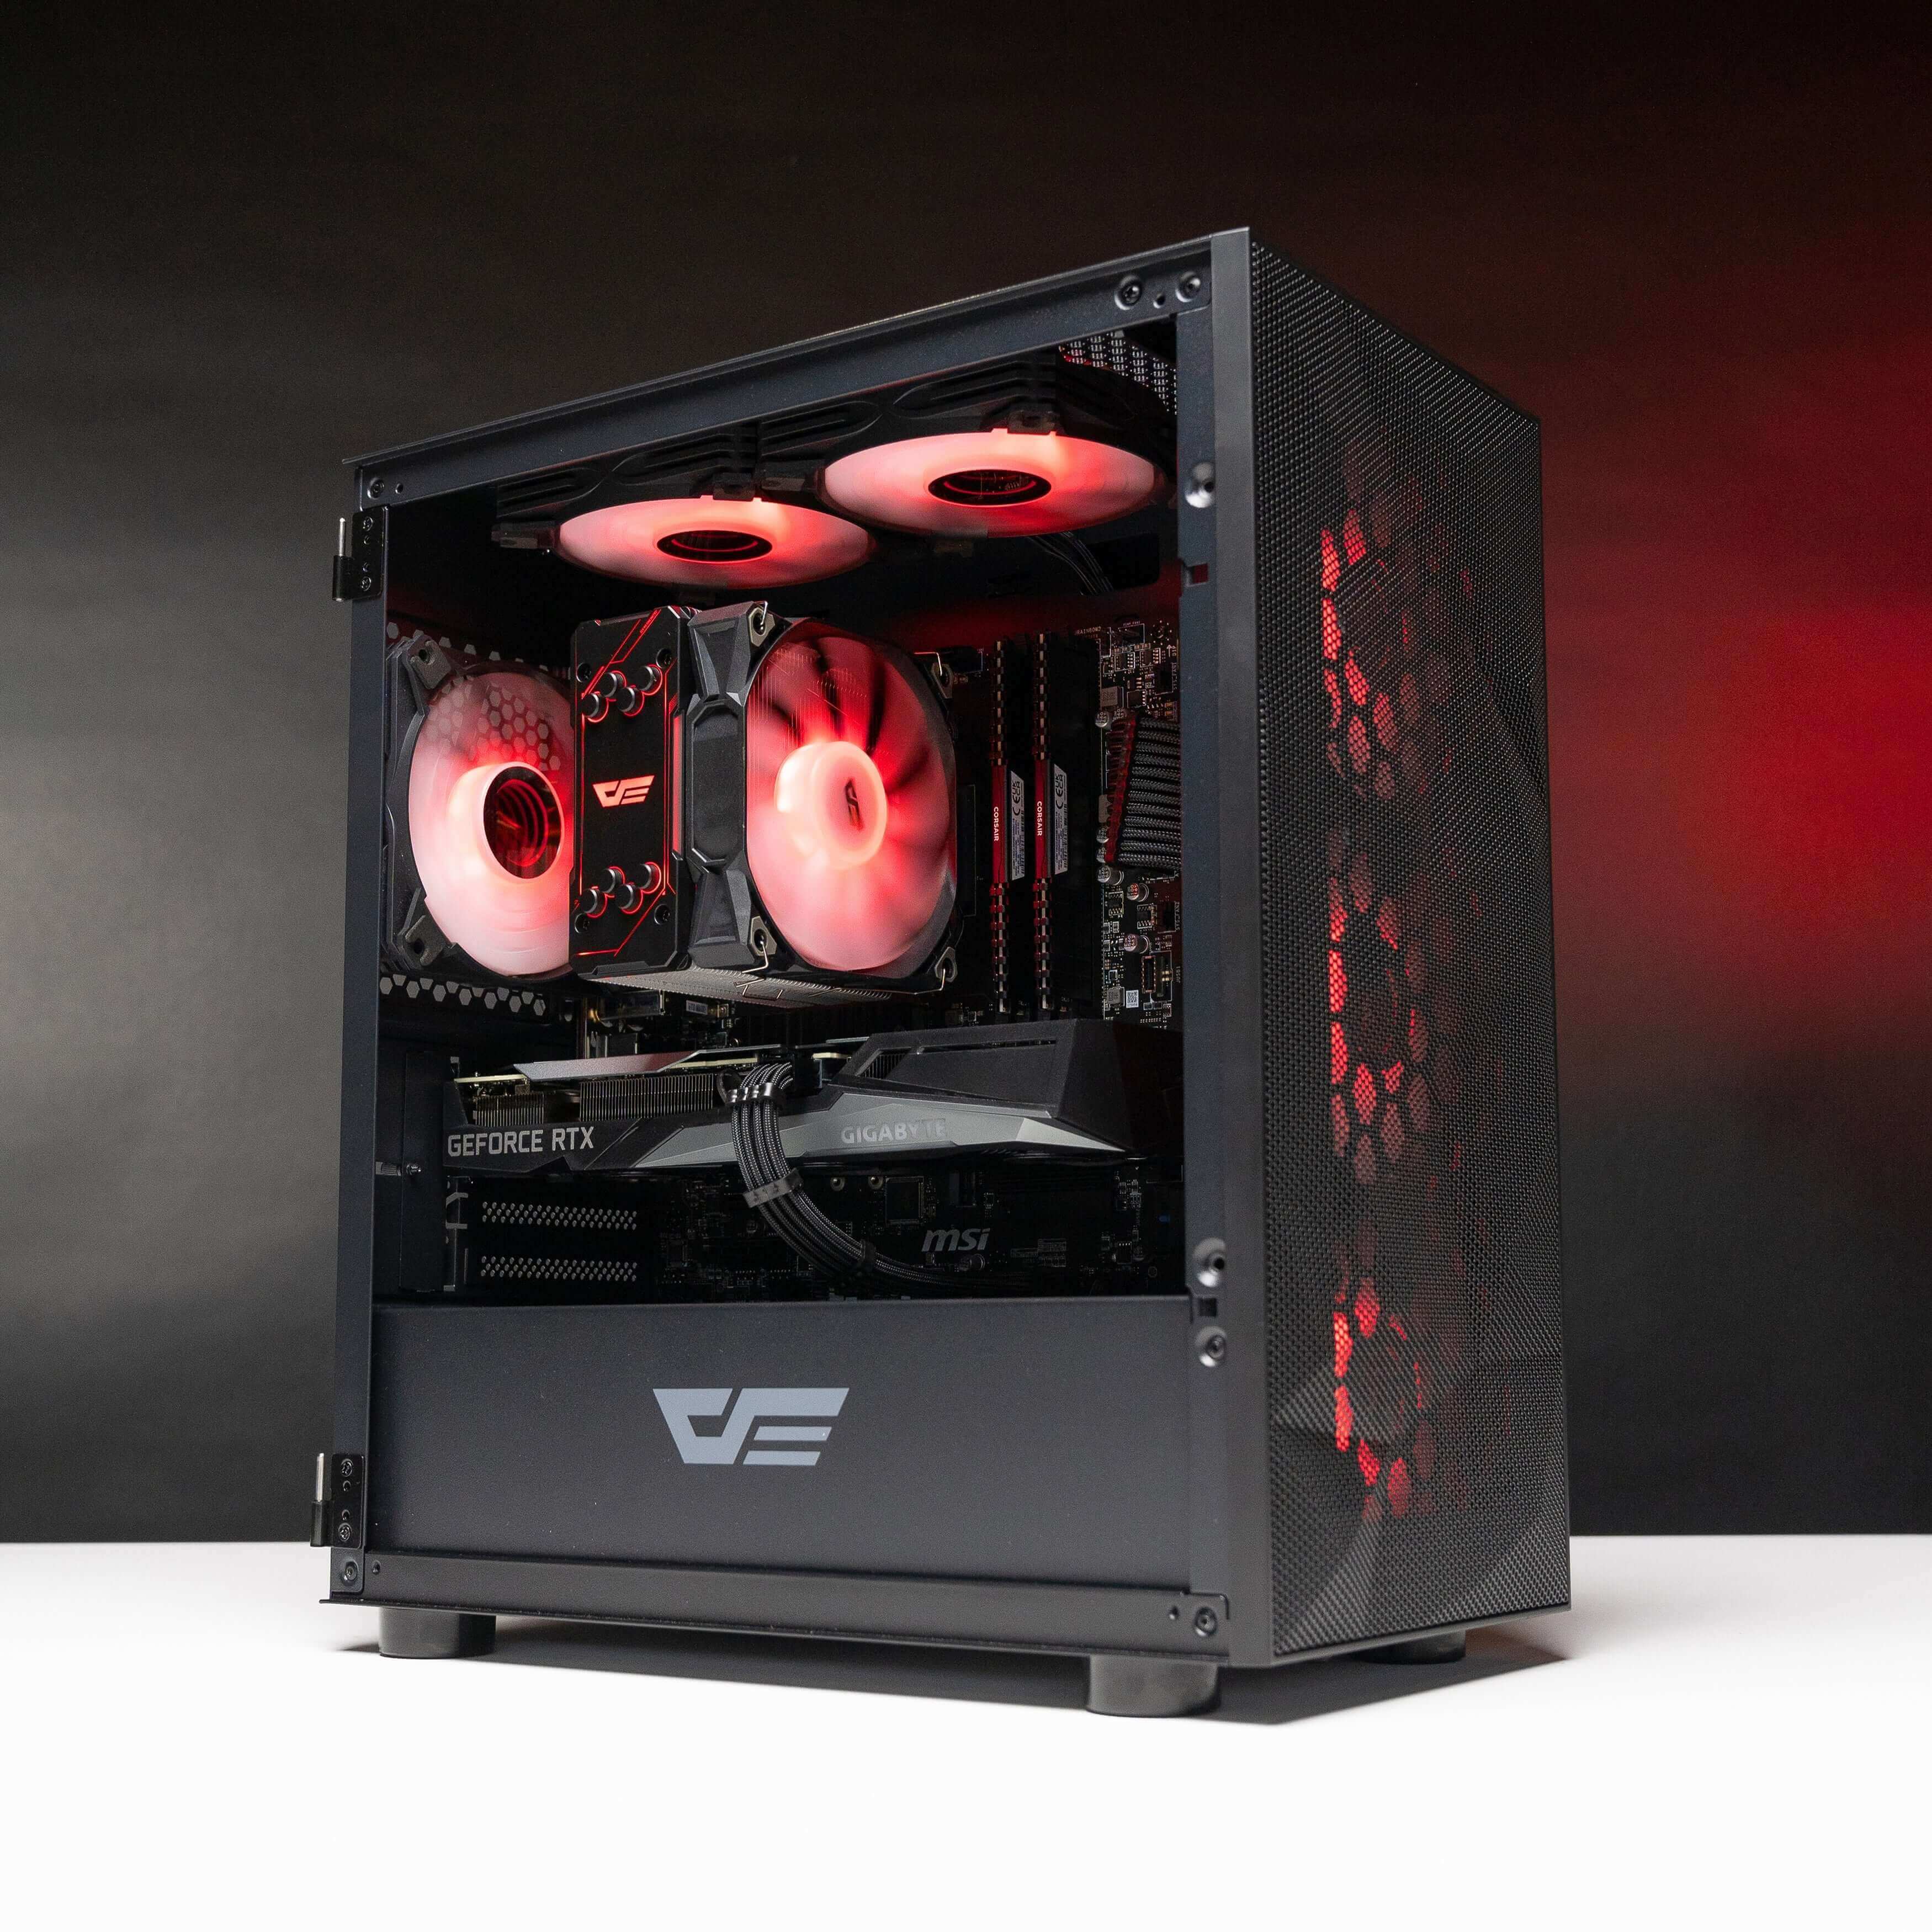 The TERROR: LVL 7 (Ryzen) - EOFY SALE Gaming PC incorporates the AMD Wraith Stealth cooler, FSP HYPER 80+ PRO 550W PSU, and DarkFlash DR-12 120mm ARGB fans x 6, enhancing cooling and providing stunning visuals.